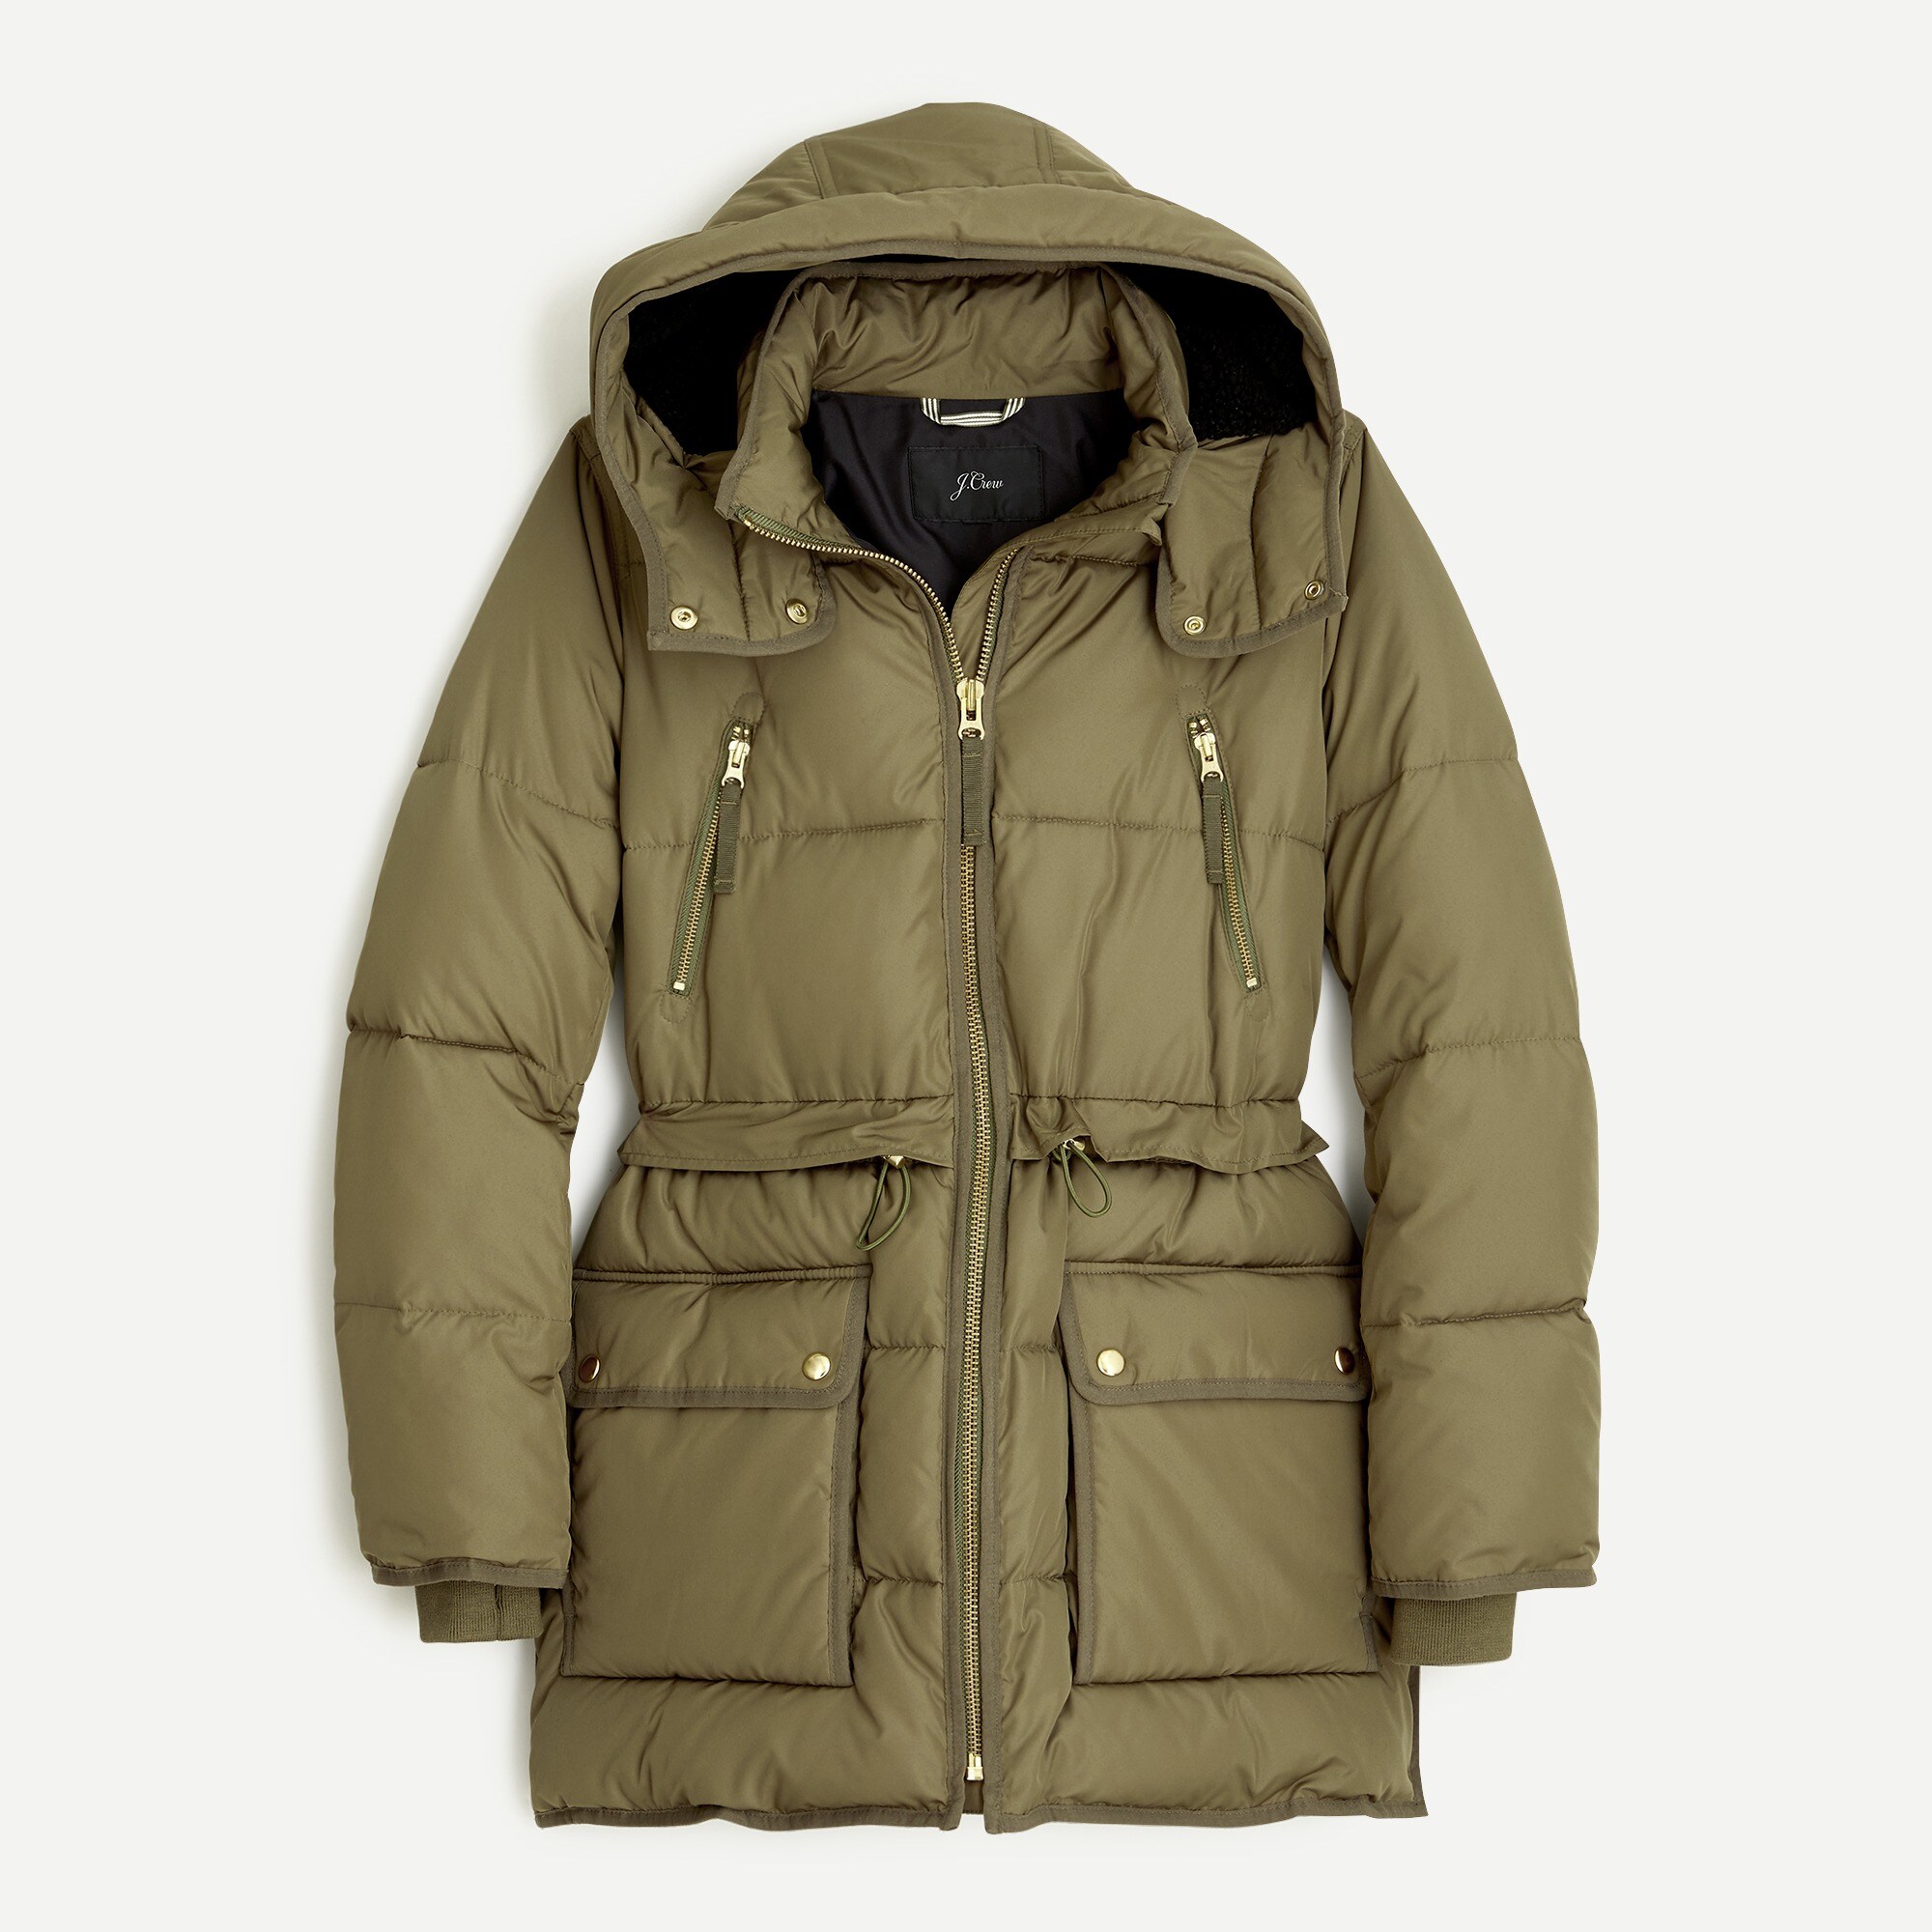 J.Crew: Chateau Puffer Jacket With PrimaLoft® For Women